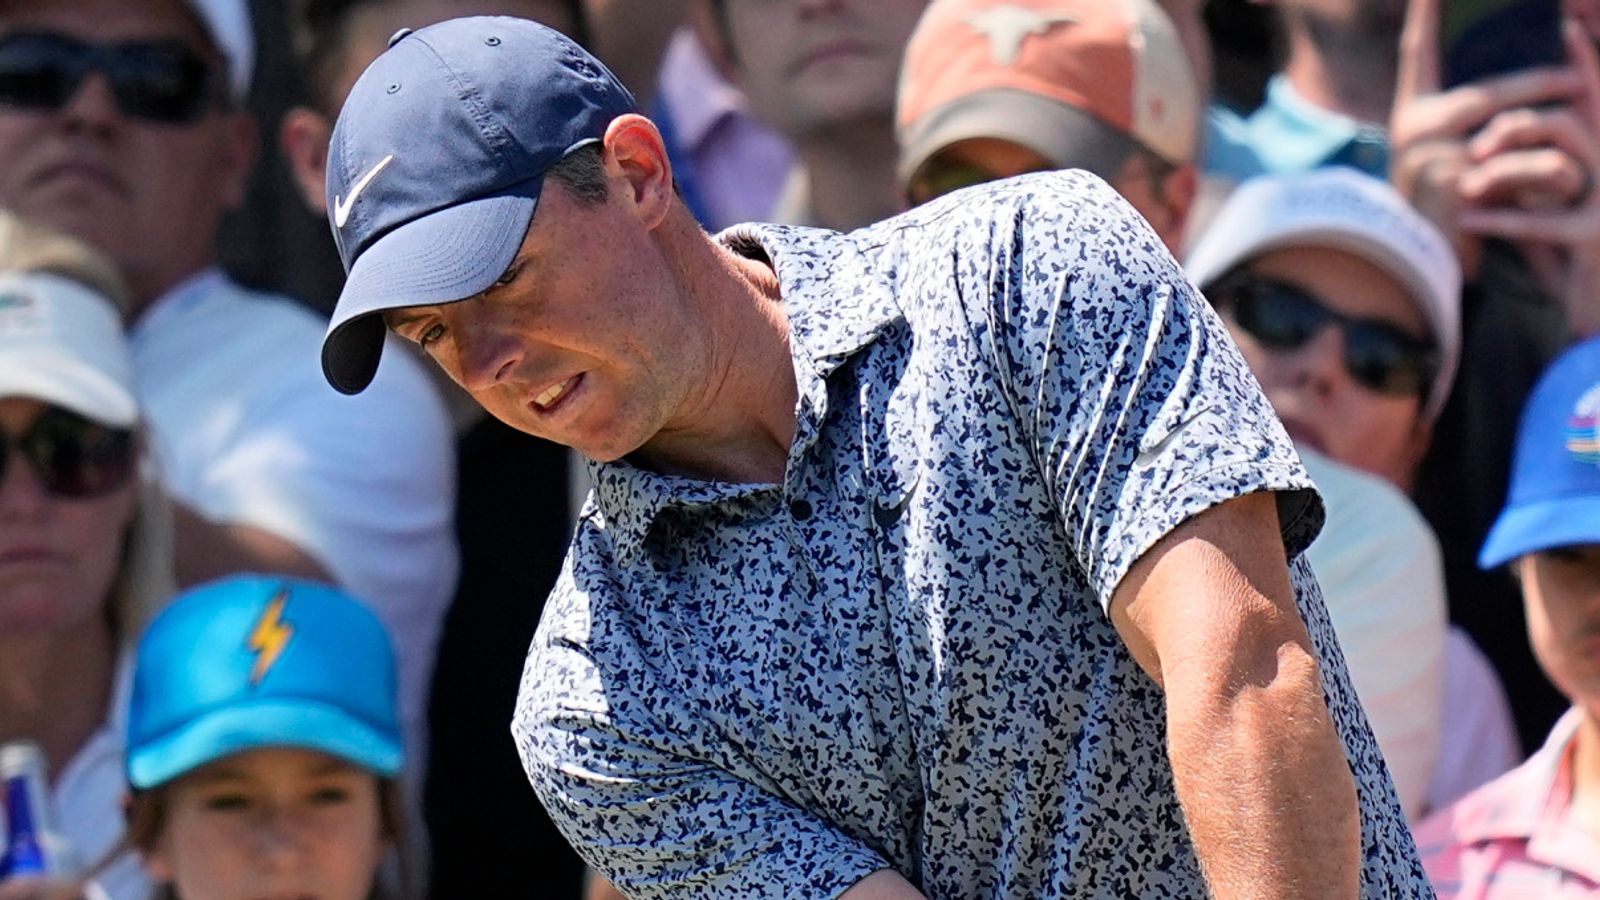 Rory McIlroy qualifies for WGC-Dell Technologies Match Play semi-finals after Xander Schauffele nail-biter